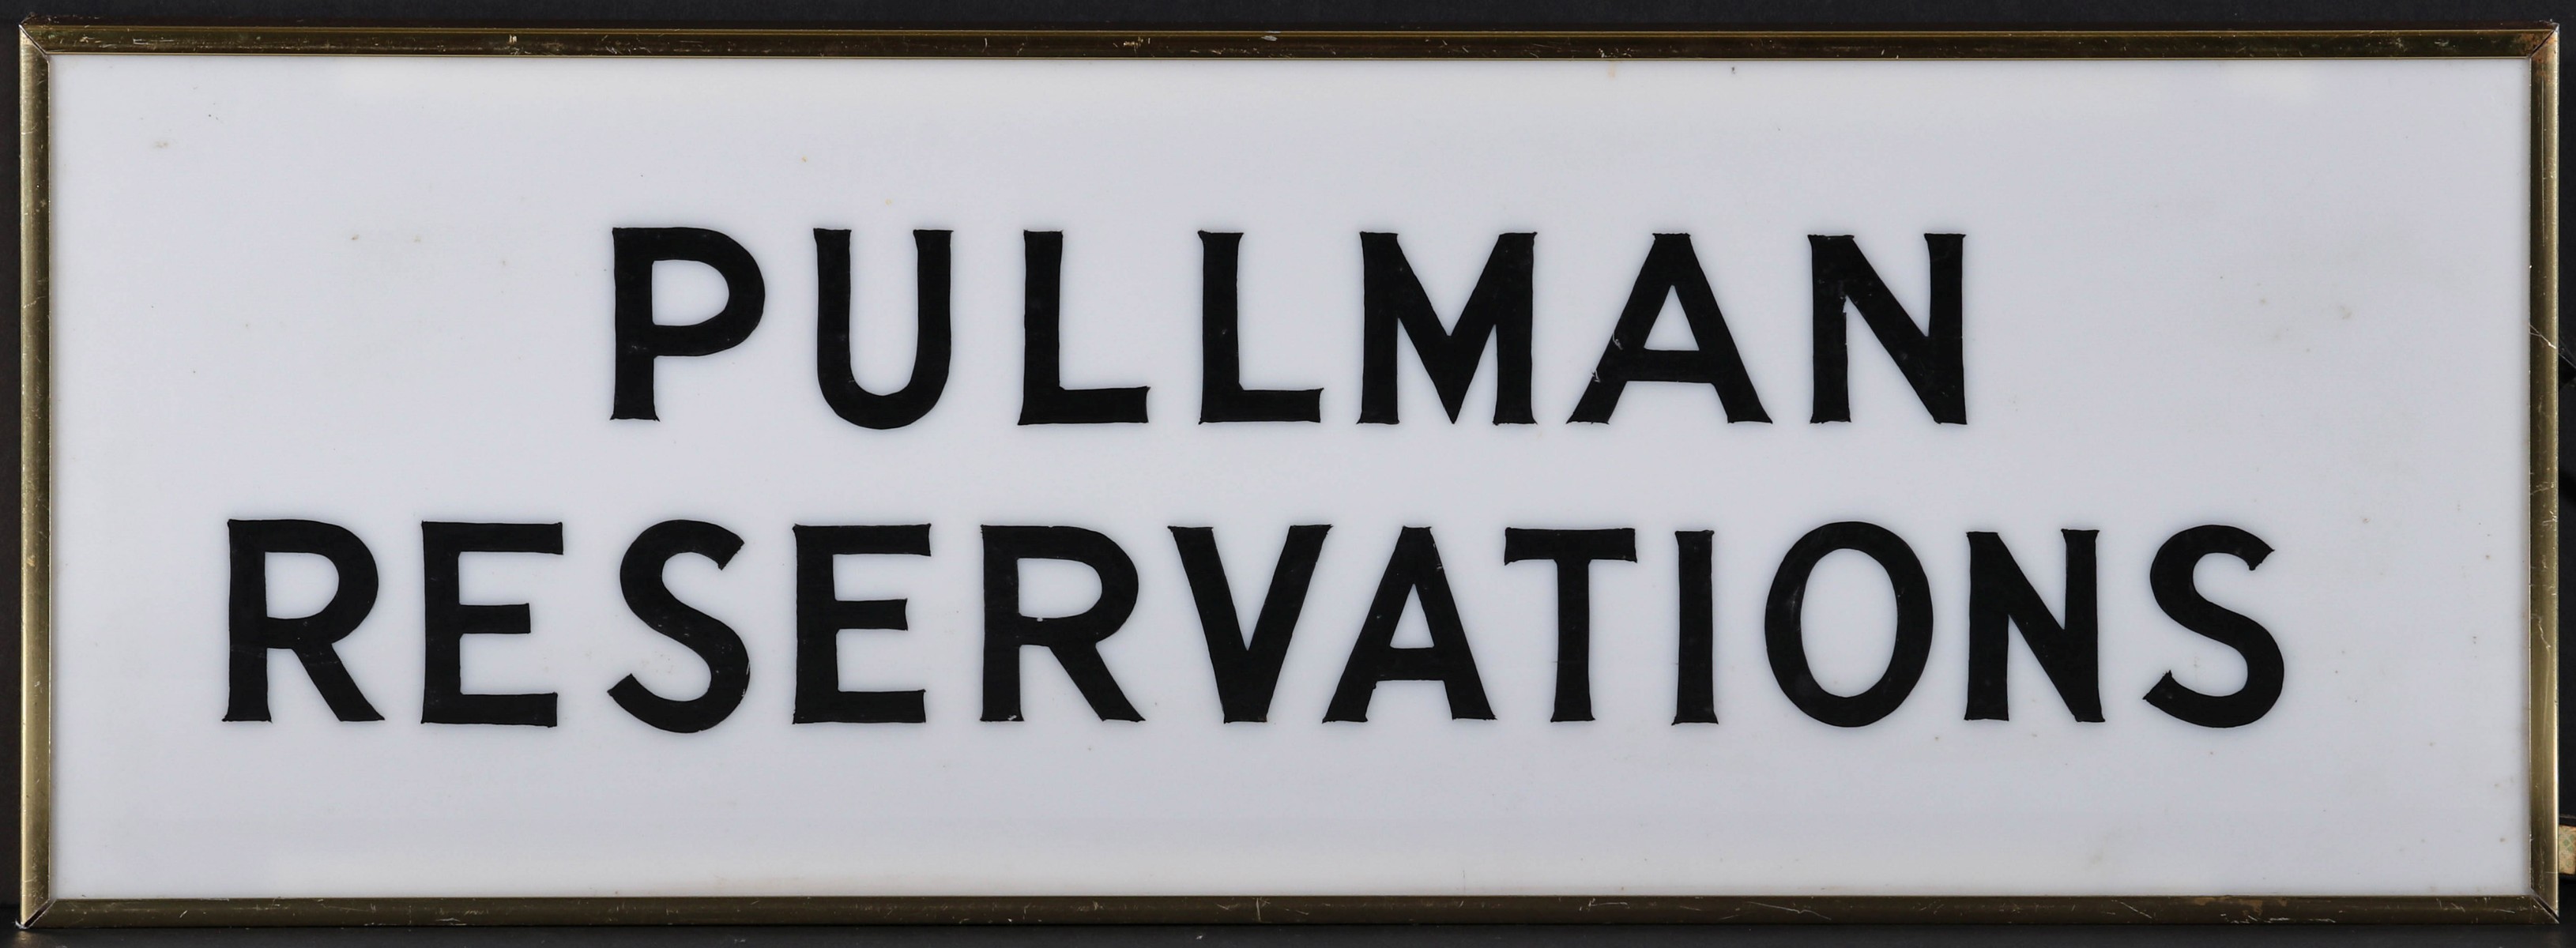 A LIGHTED ACRYLIC SIGN FOR 'PULLMAN RESERVATIONS'